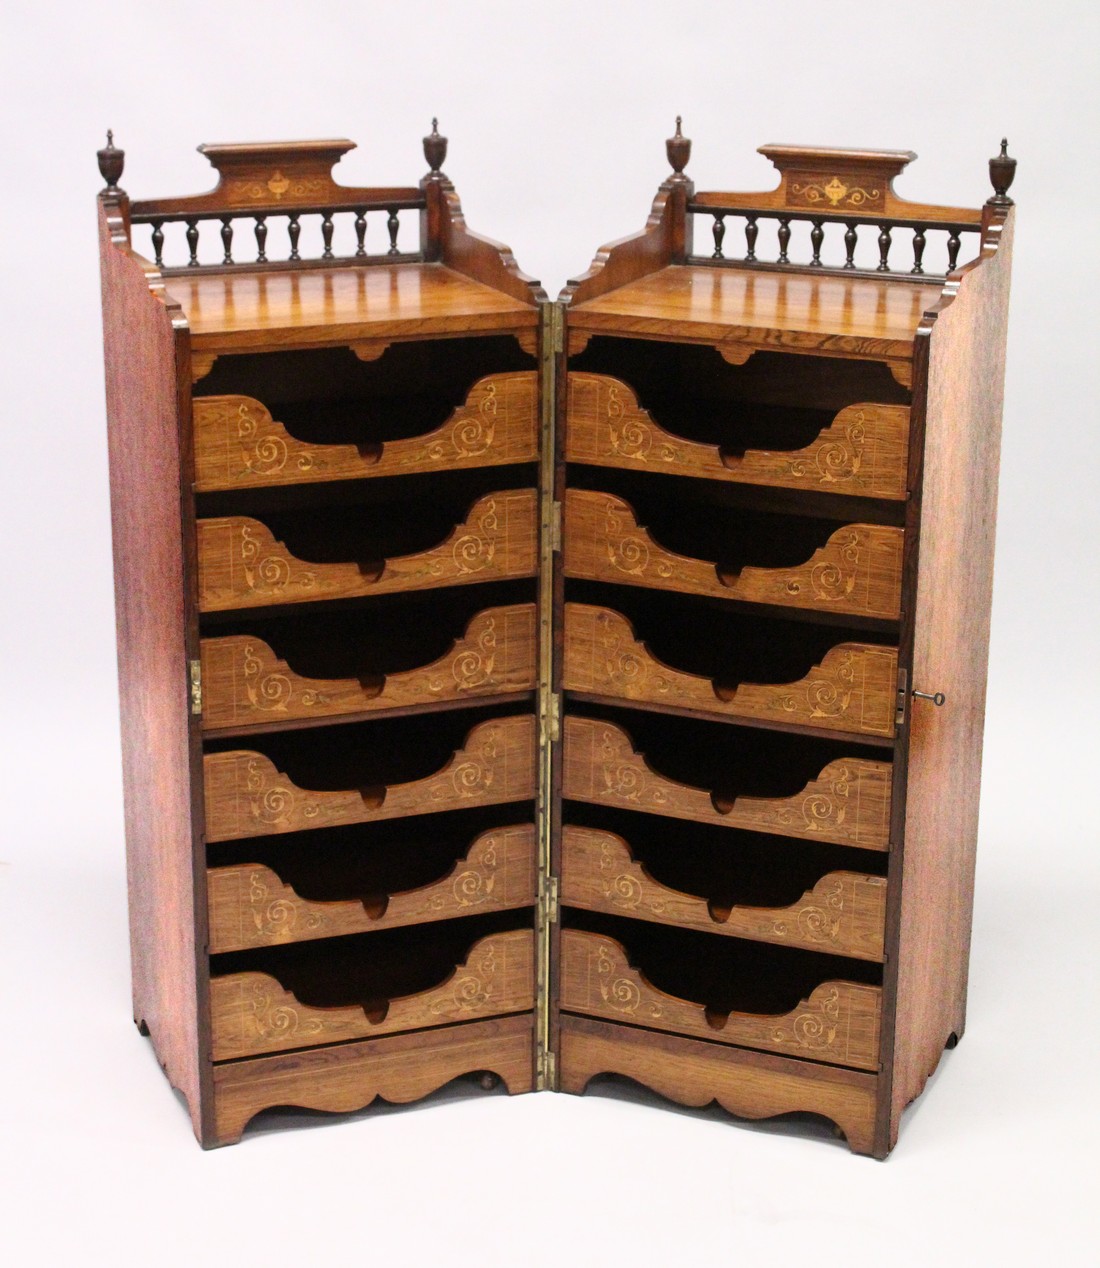 A RARE 19TH CENTURY ROSEWOOD INLAID FOLDING CAMPAIGN CUPBOARD